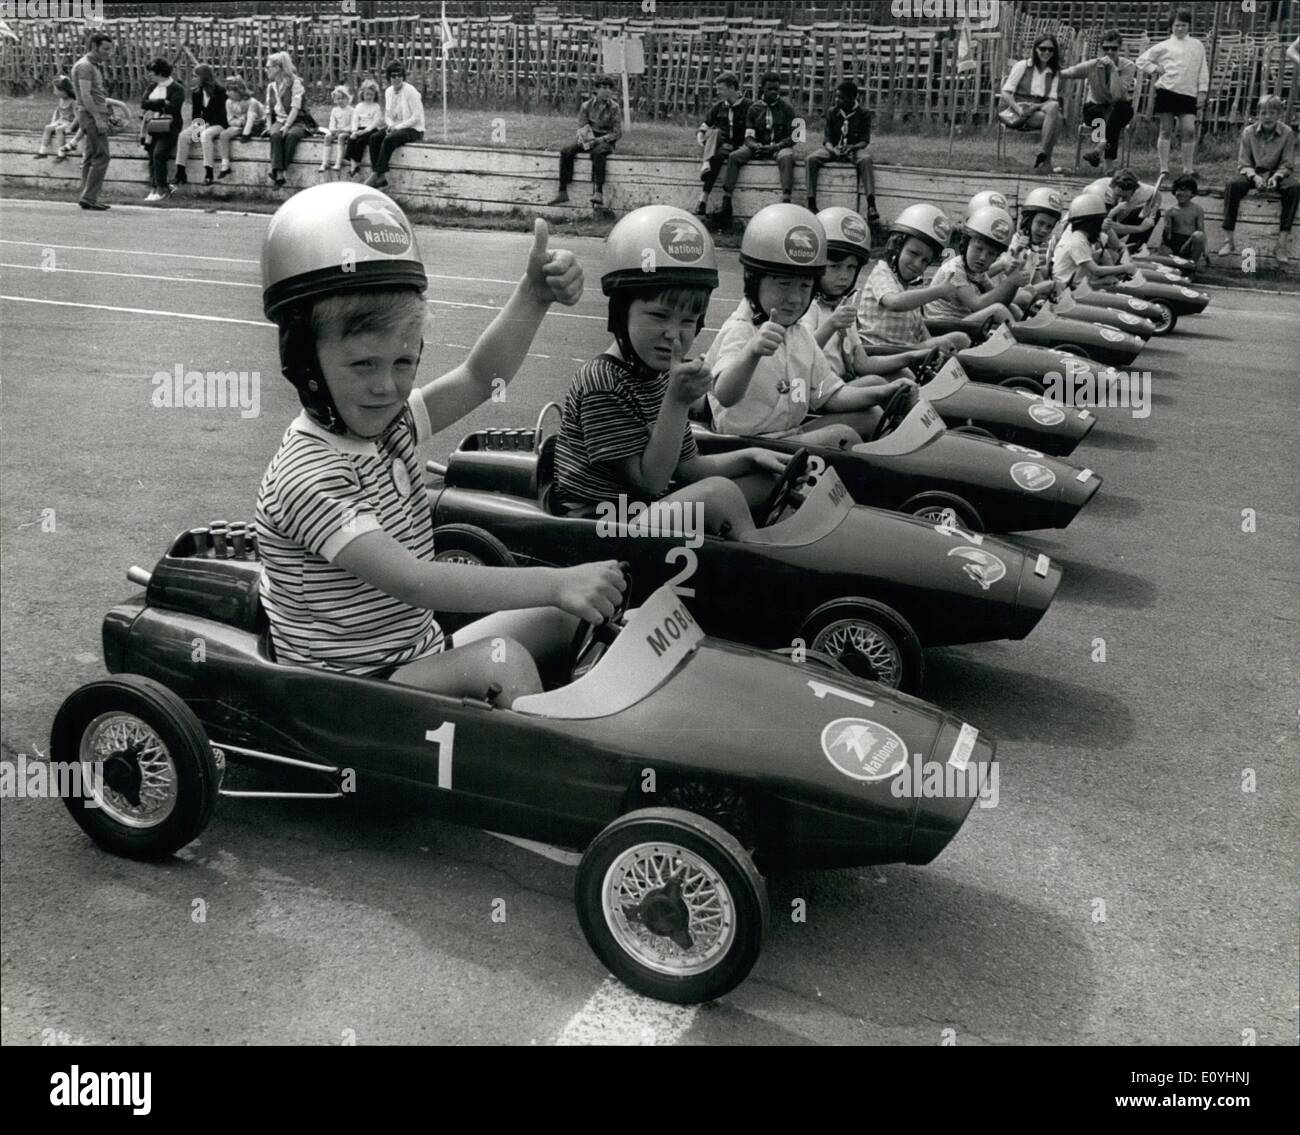 Jun. 06, 1970 - The RacJunior Grand Prix'' Race at Crystal palace: Britain's young sapiring drives took party today in the Rac ''Junior Grand Prix''. The Competitors were at the Controls of ''pedal-powered'' miniracing cars as they made a 75-yards dash down a section of the motor racing circuit at Crystal Palace, normally used by the experienced racing drivers. The Winners prize was the car he drove to victory, and the race was open to boys and girls aged 6 and under. Picture shows: The Young competitors give the ''Thumb-up'' sign as they line up for the start of the race. Stock Photo